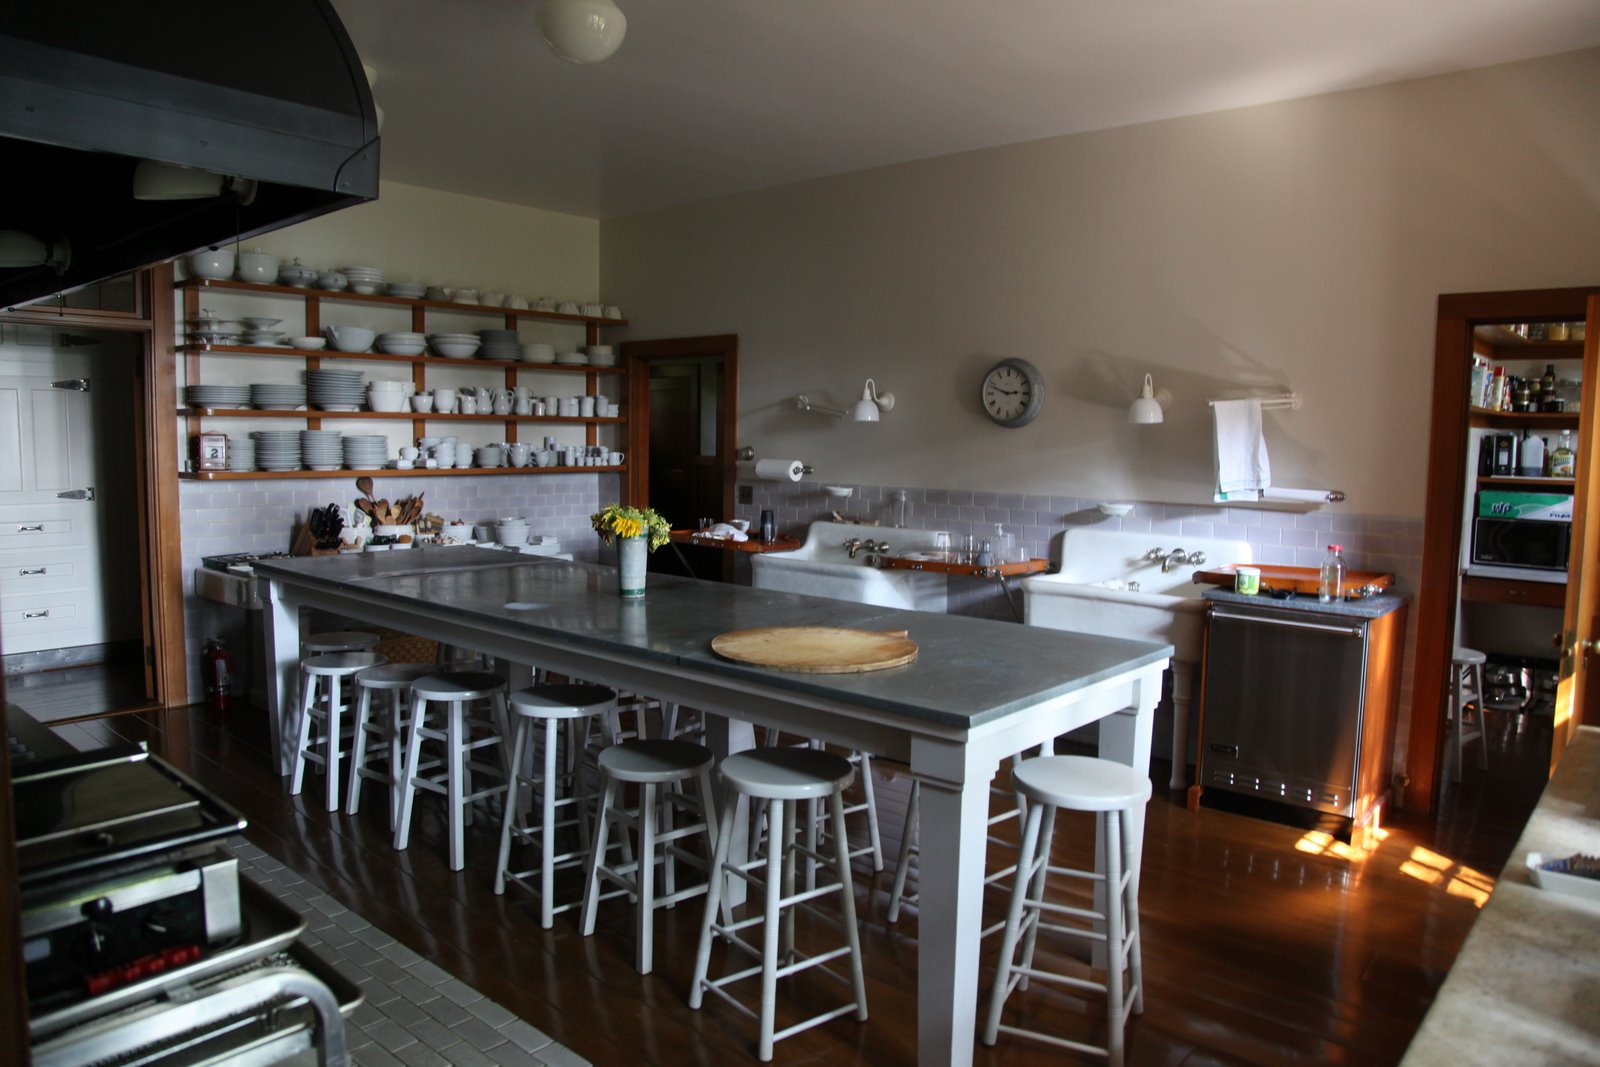 The Skylands  Kitchen  A Most Functional Space The 